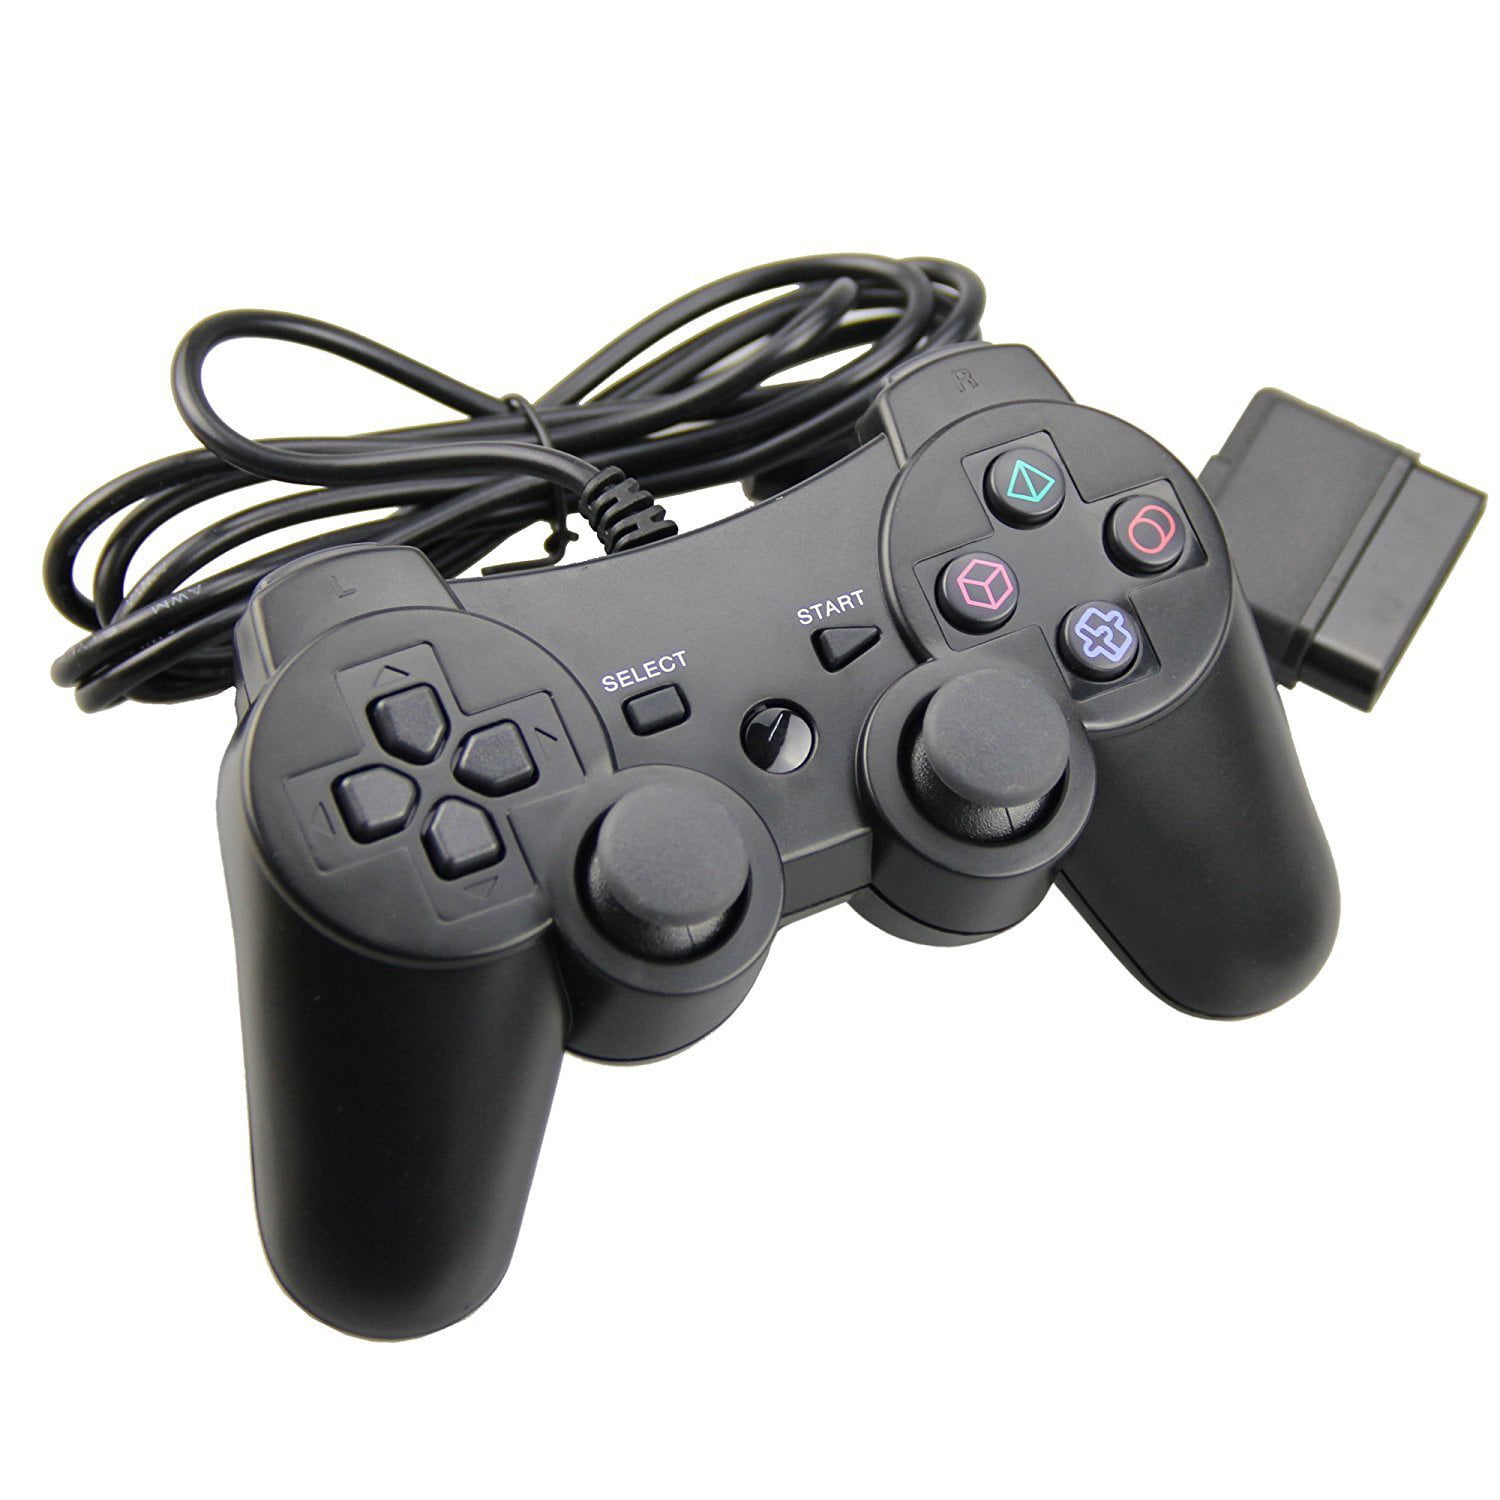 PS2) Wired Controller for Sony PlayStation 2 - Black Walmart.com